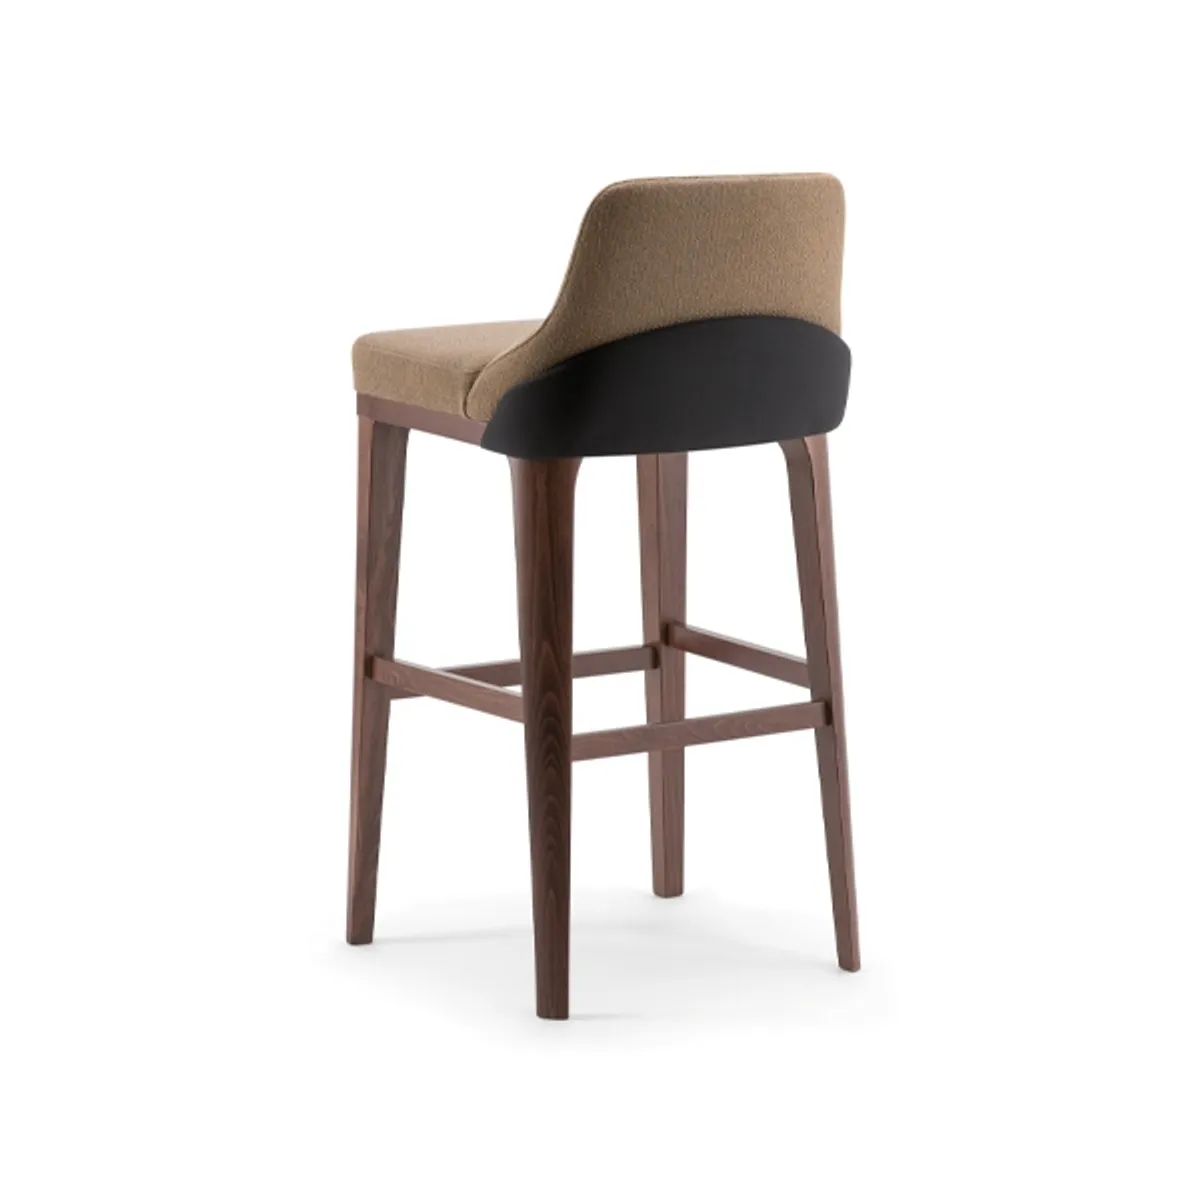 Dodie bar stool Inside Out Contracts3